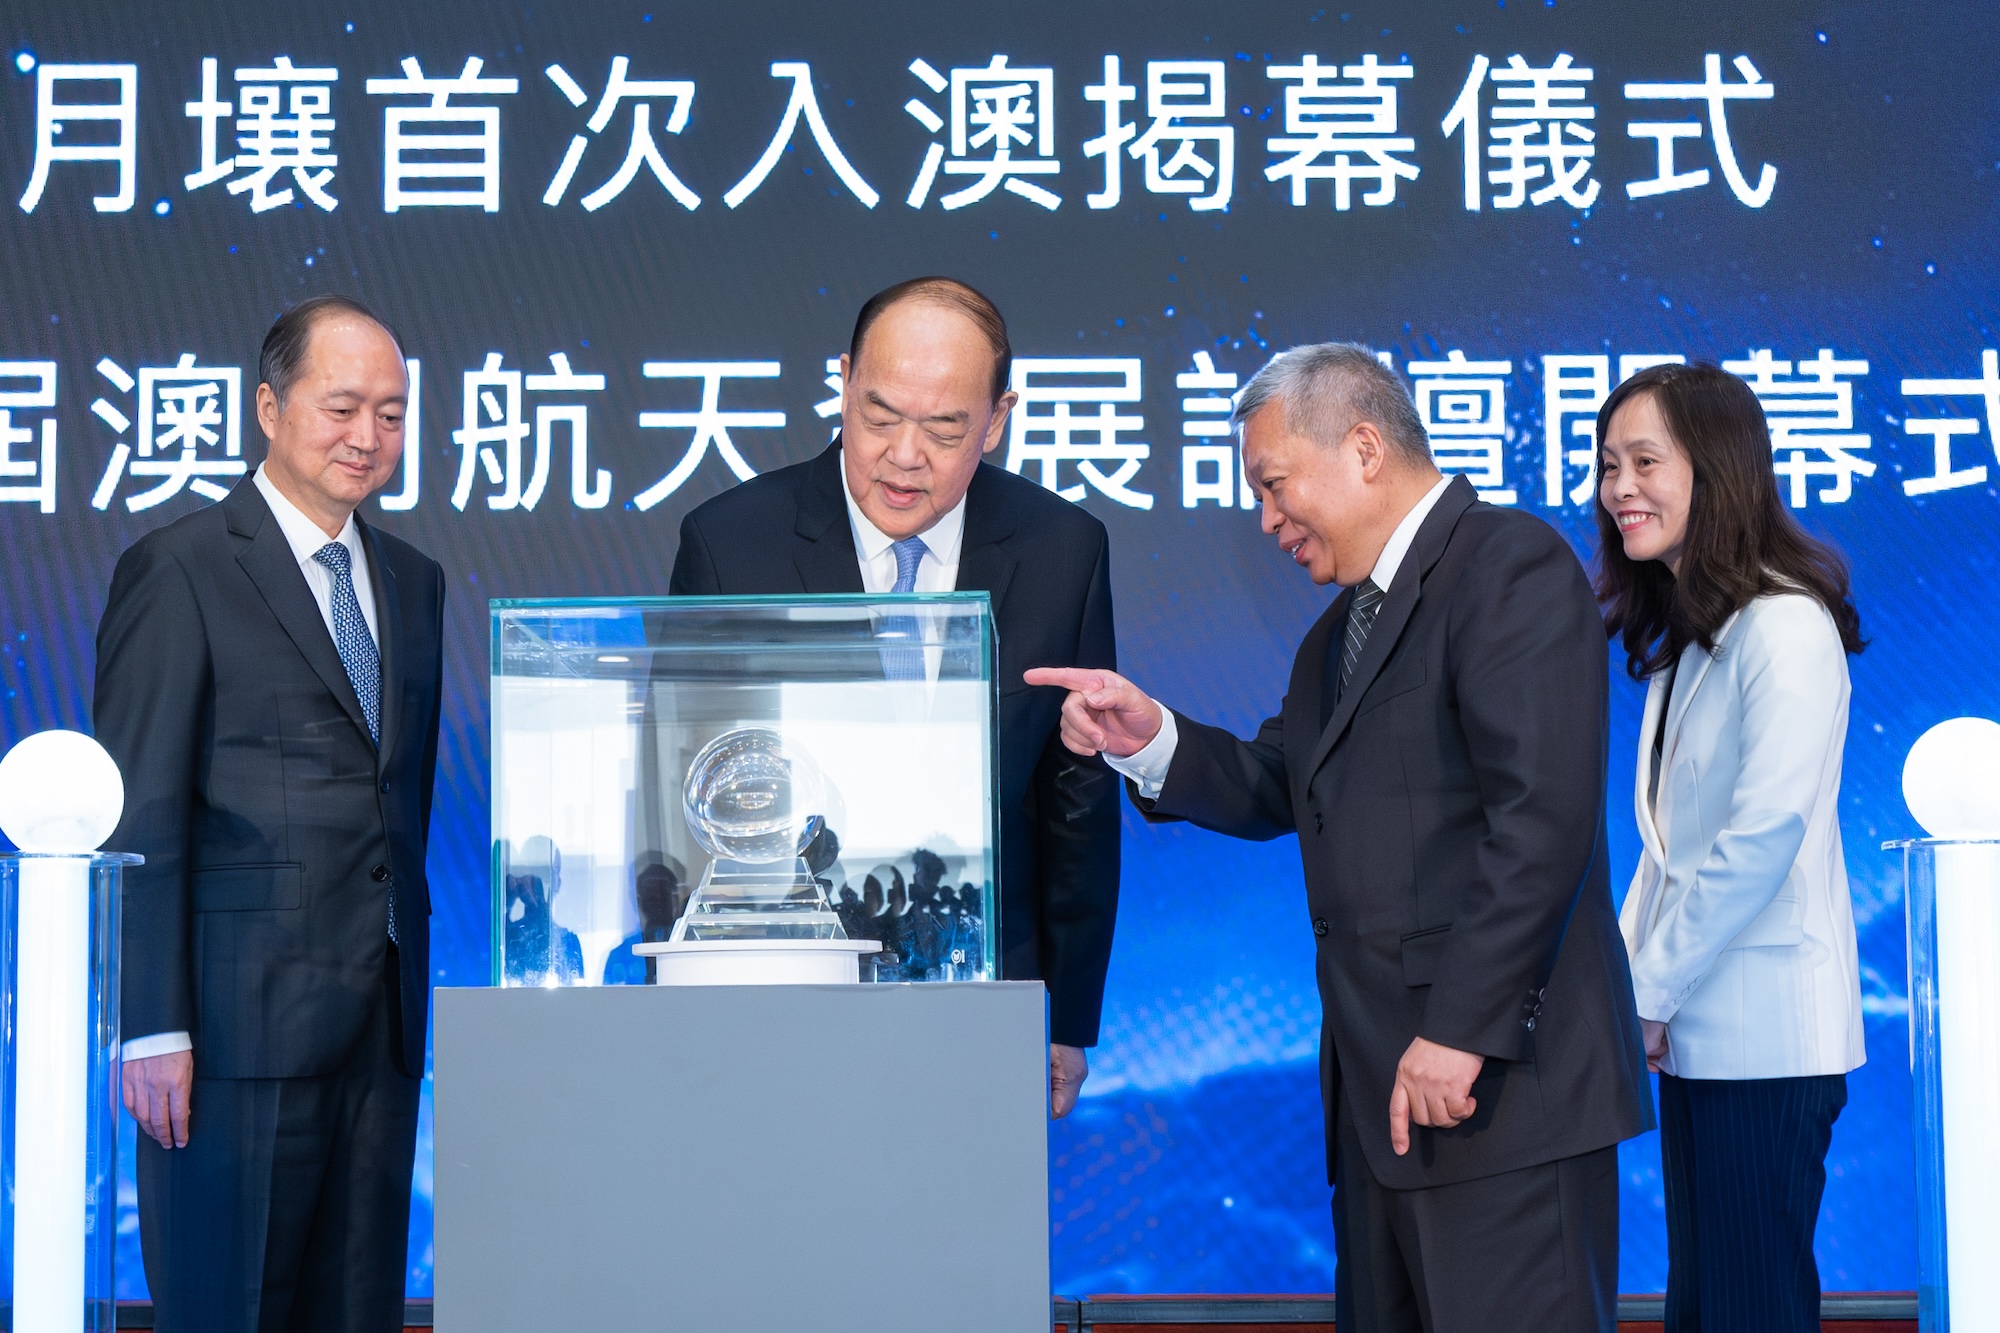 Ho Iat Seng (2nd L), chief executive of Macao, Zheng Xincong (1st L), director of the Liaison Office of the Central People's Government in Macao, and Zhang Kejian (2nd R), head of the China National Space Administration, look at the lunar soil during the opening ceremony of an exhibition of China's achievements on space exploration and navigation